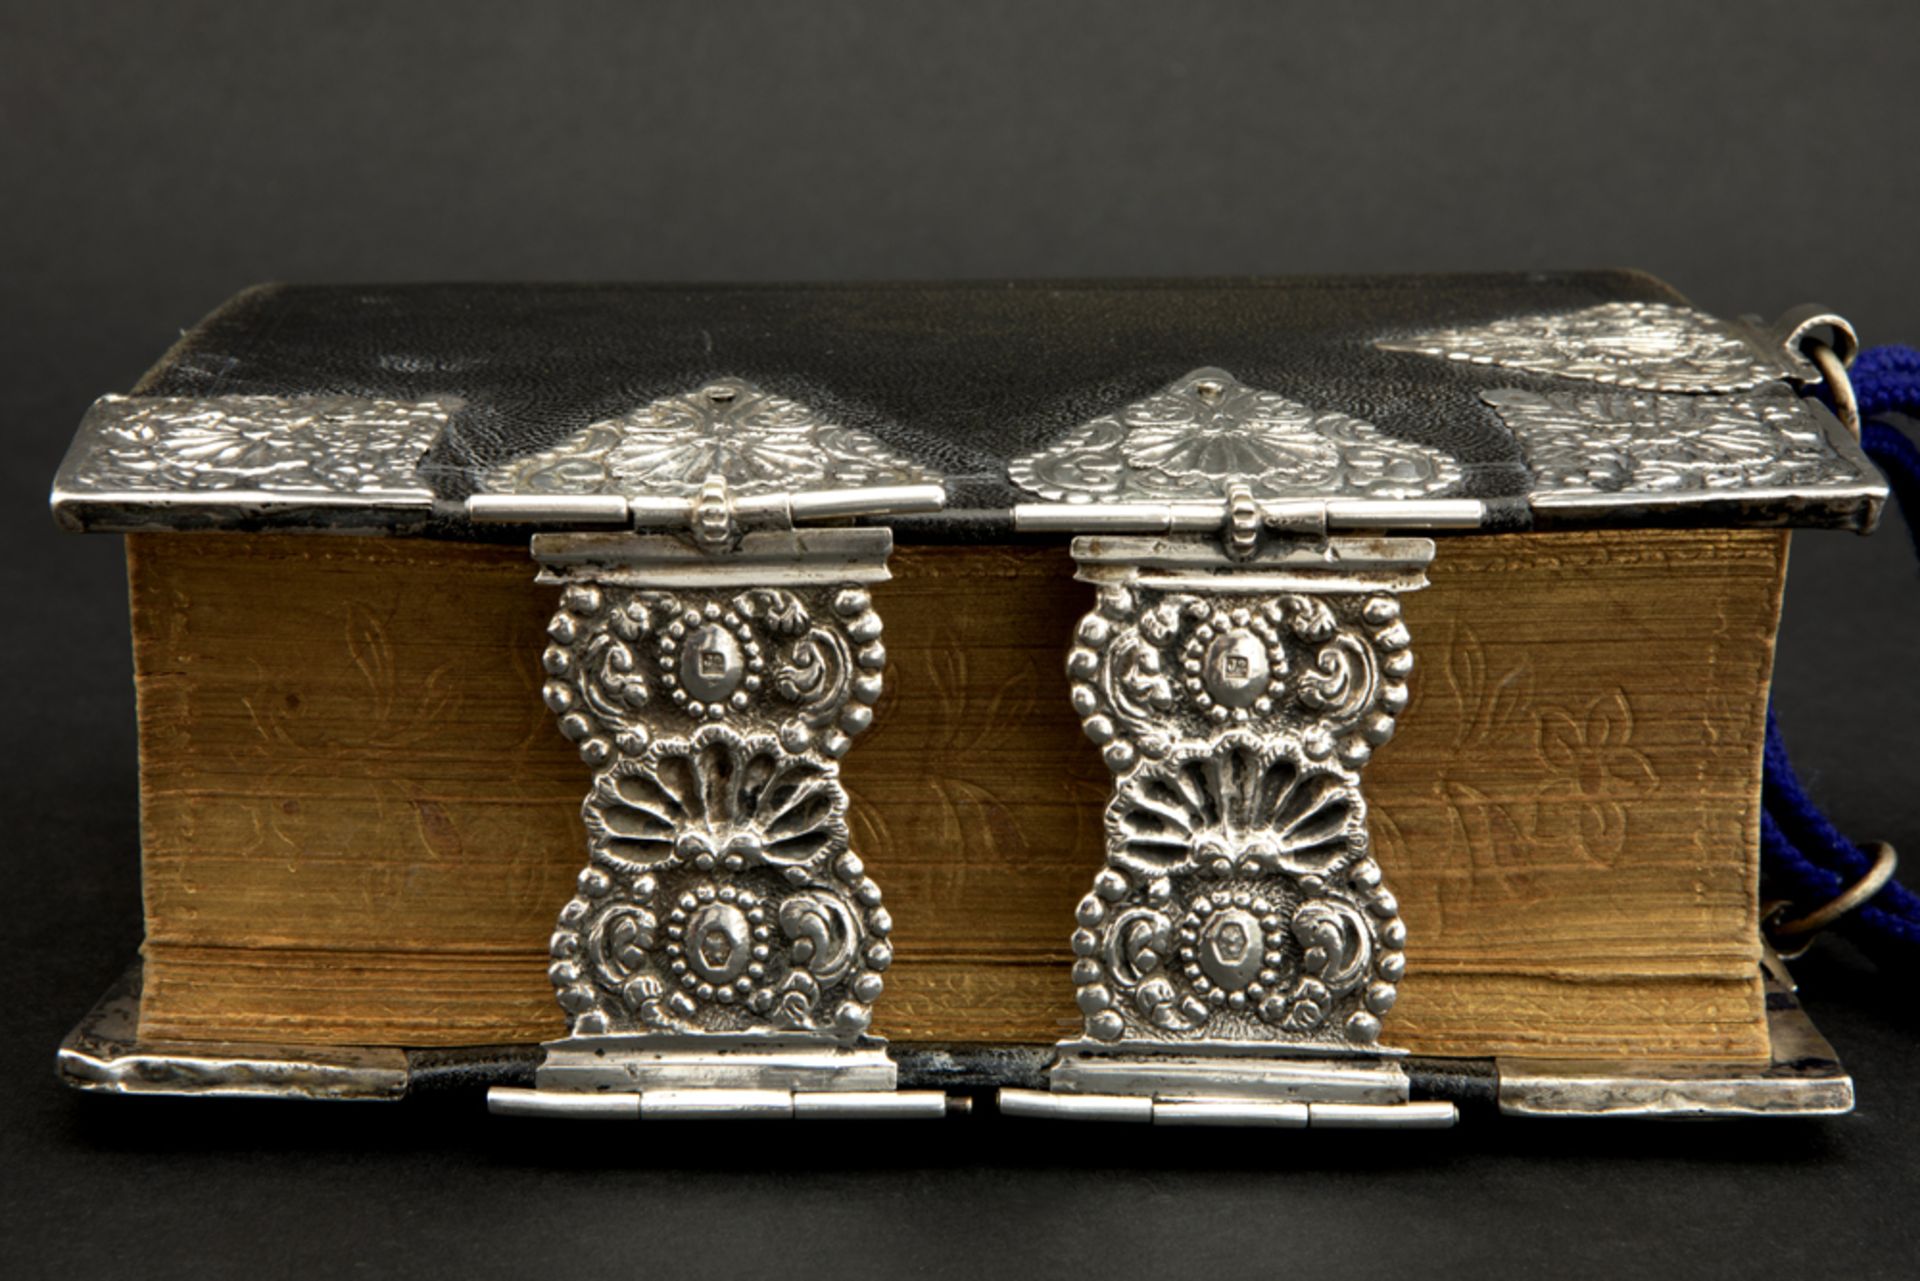 19th Cent. Dutch Bible with mountings in marked silver edited by J. Brandt & Son in Amsterdam dd